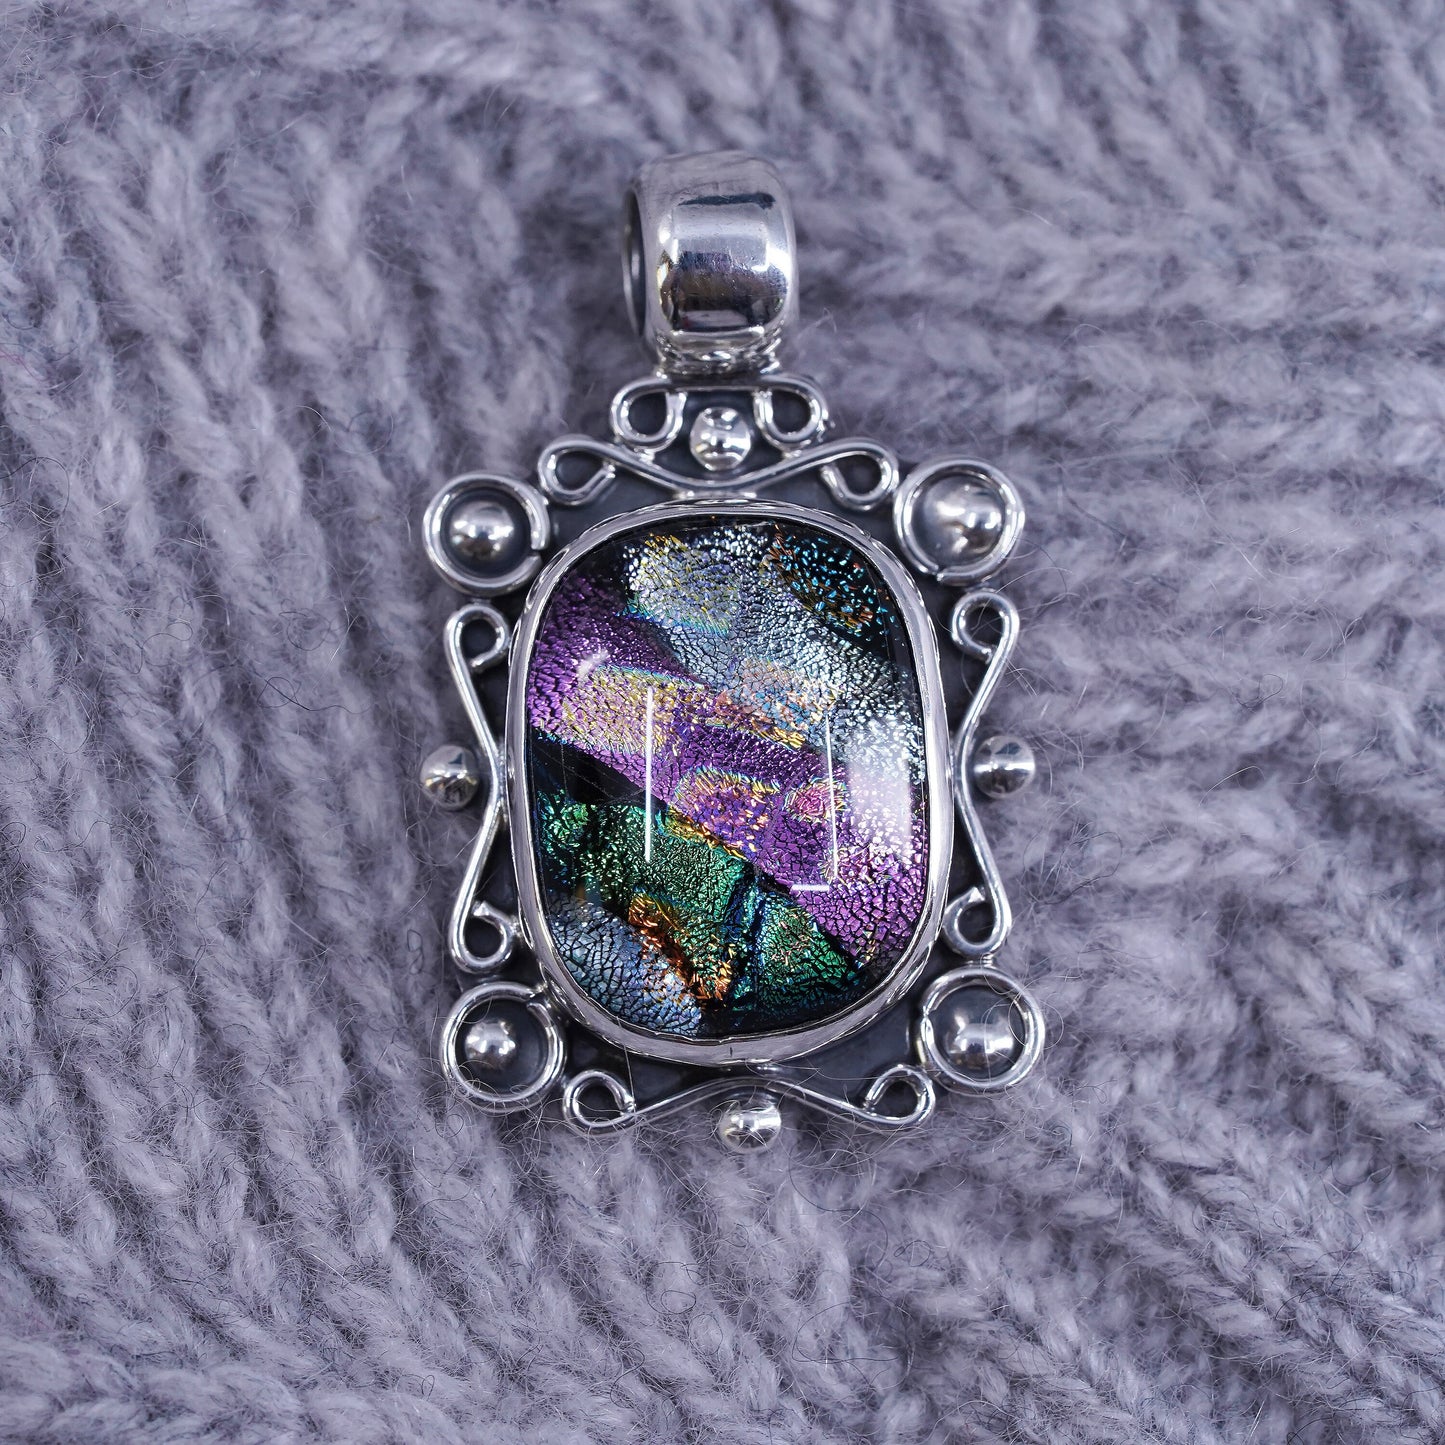 Vintage Mexican sterling 925 silver handmade pendant with dichroic glass